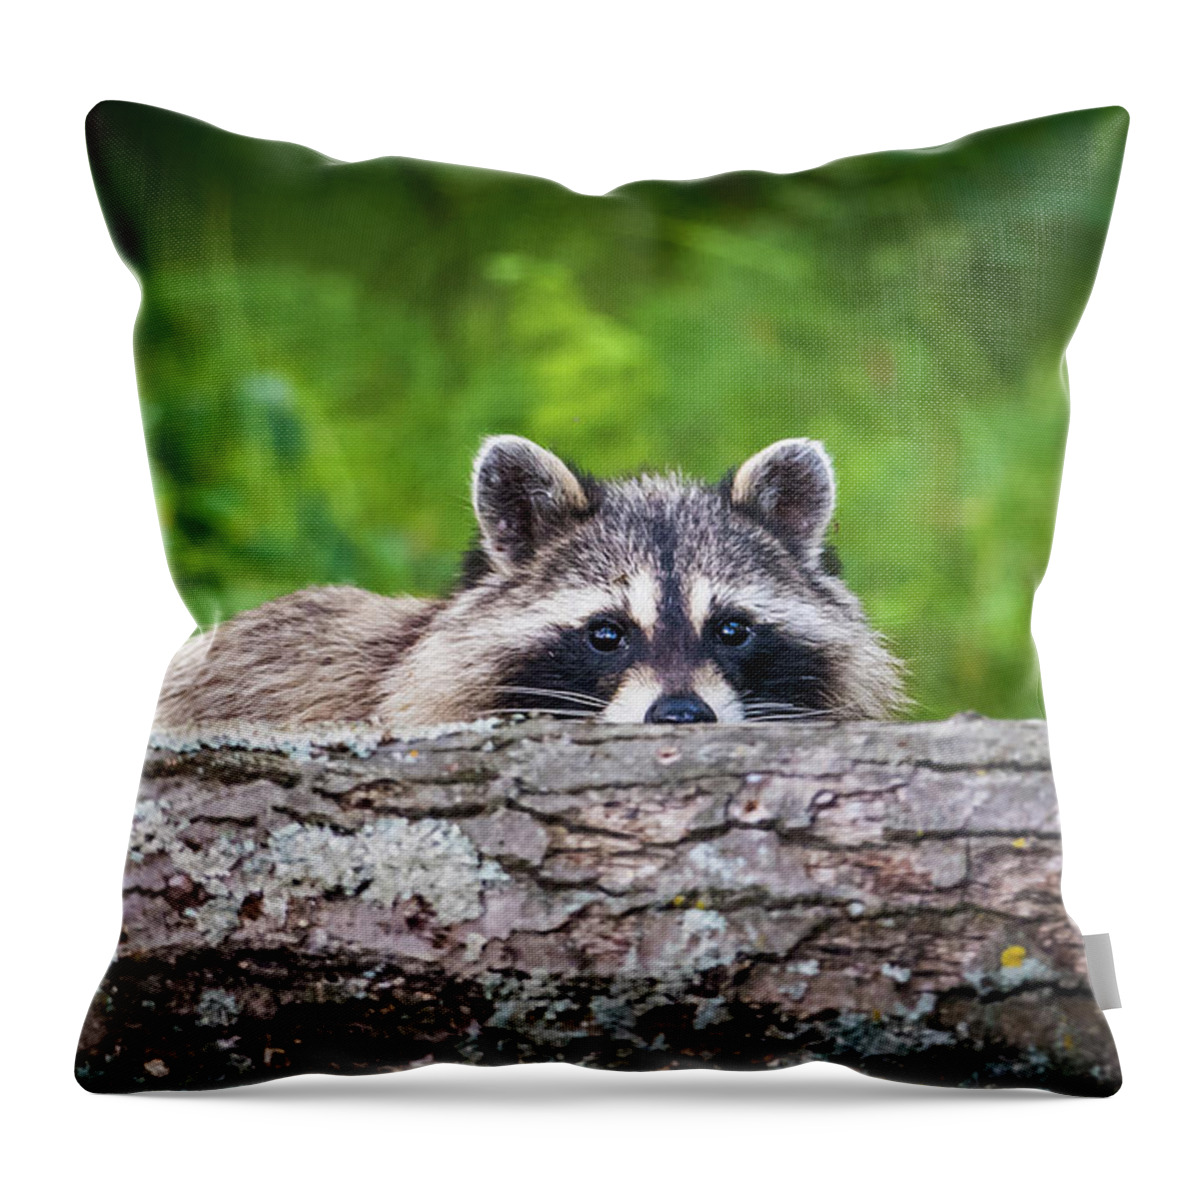 Racoon Throw Pillow featuring the photograph Racoon Hiding by Paul Freidlund